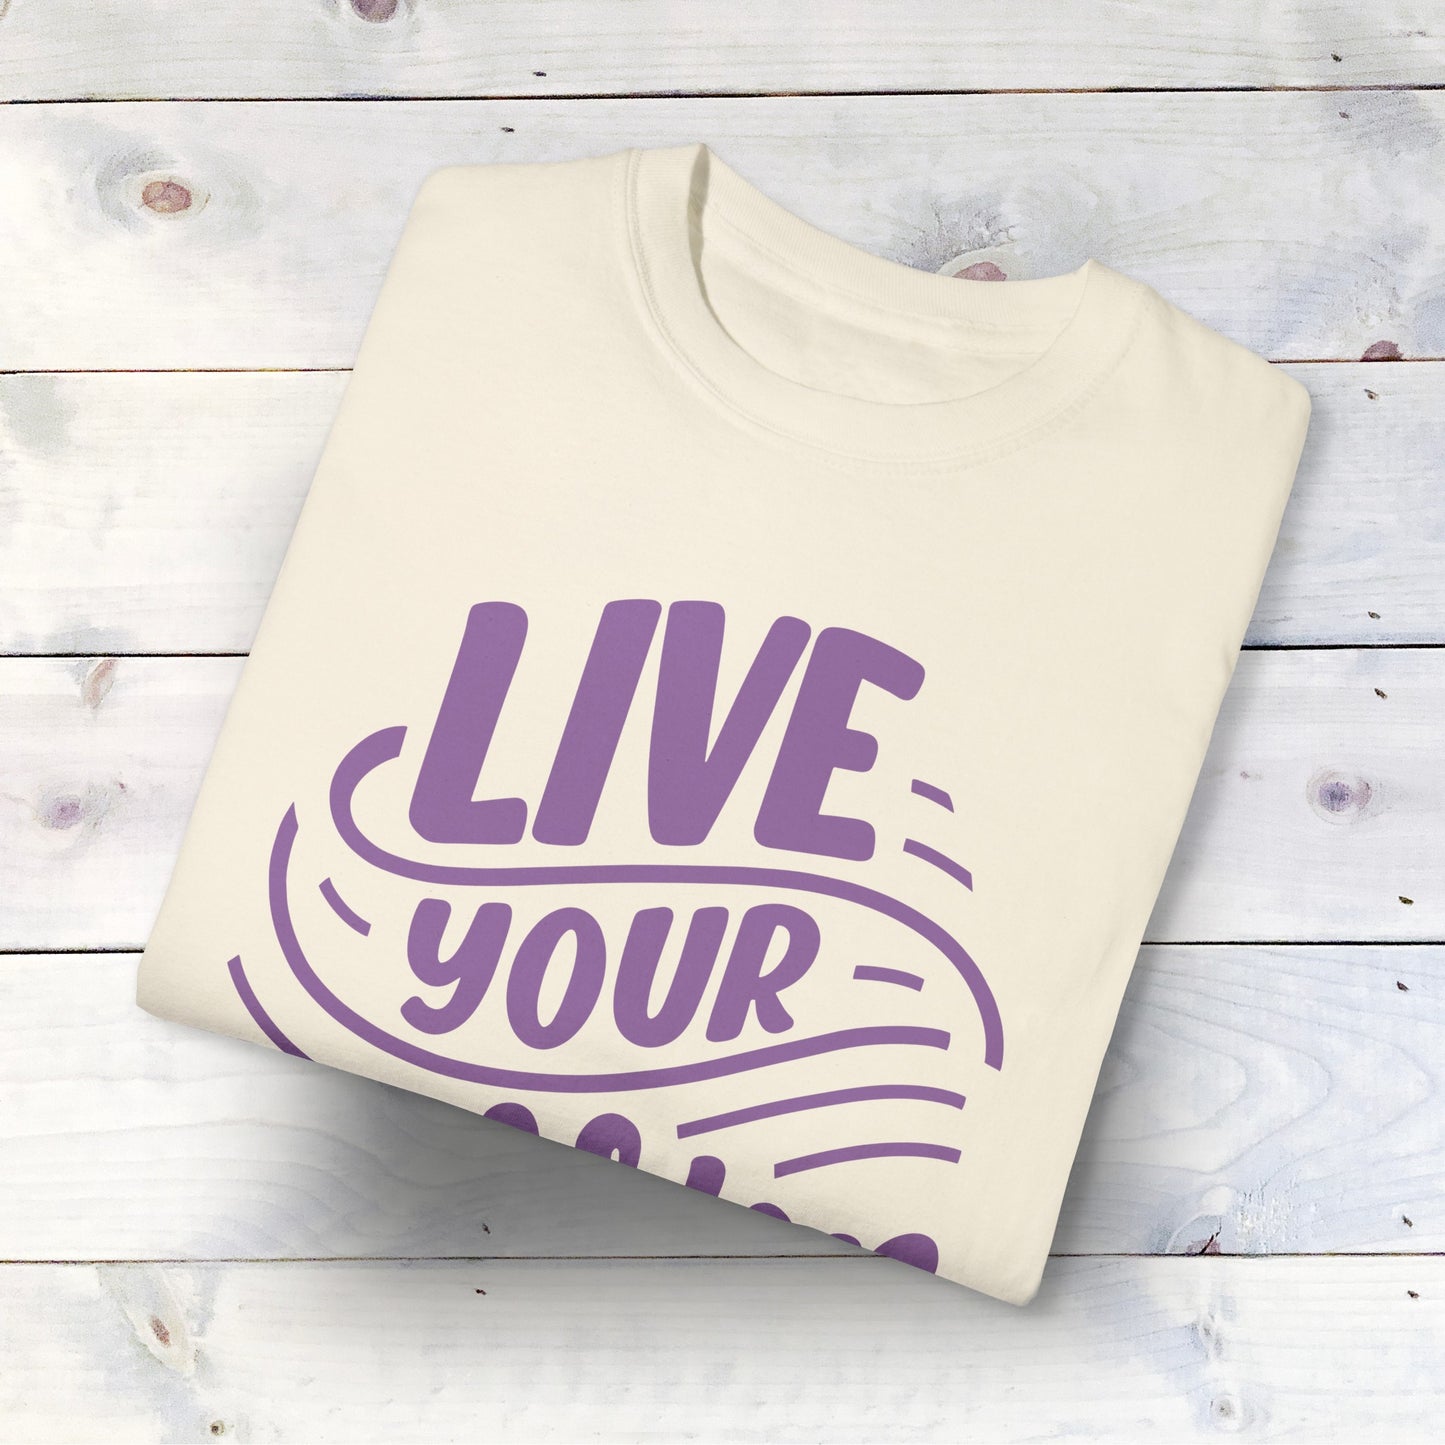 Live Your Passion - Garment-Dyed T-Shirt - 100% Ring-Spun Cotton, Relaxed Fit